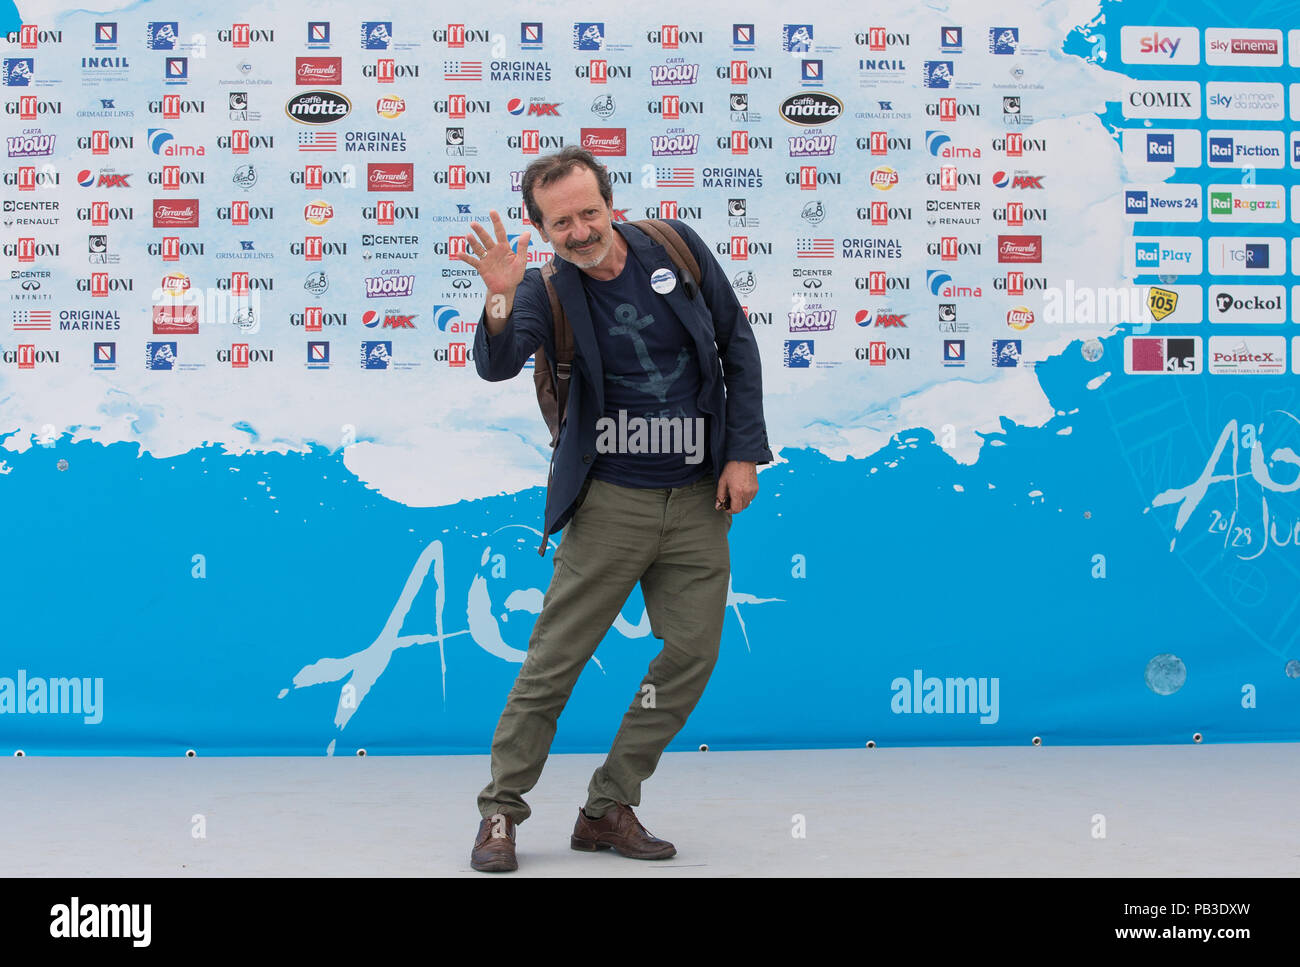 Salerno, Campania, Italy. 26th July, 2018. Rocco Papaleo, Italian actor seen posing for the camera at the festival.The 48th edition of the Giffoni Film Festival, a cinema for children. Credit: Ernesto Vicinanza/SOPA Images/ZUMA Wire/Alamy Live News Stock Photo